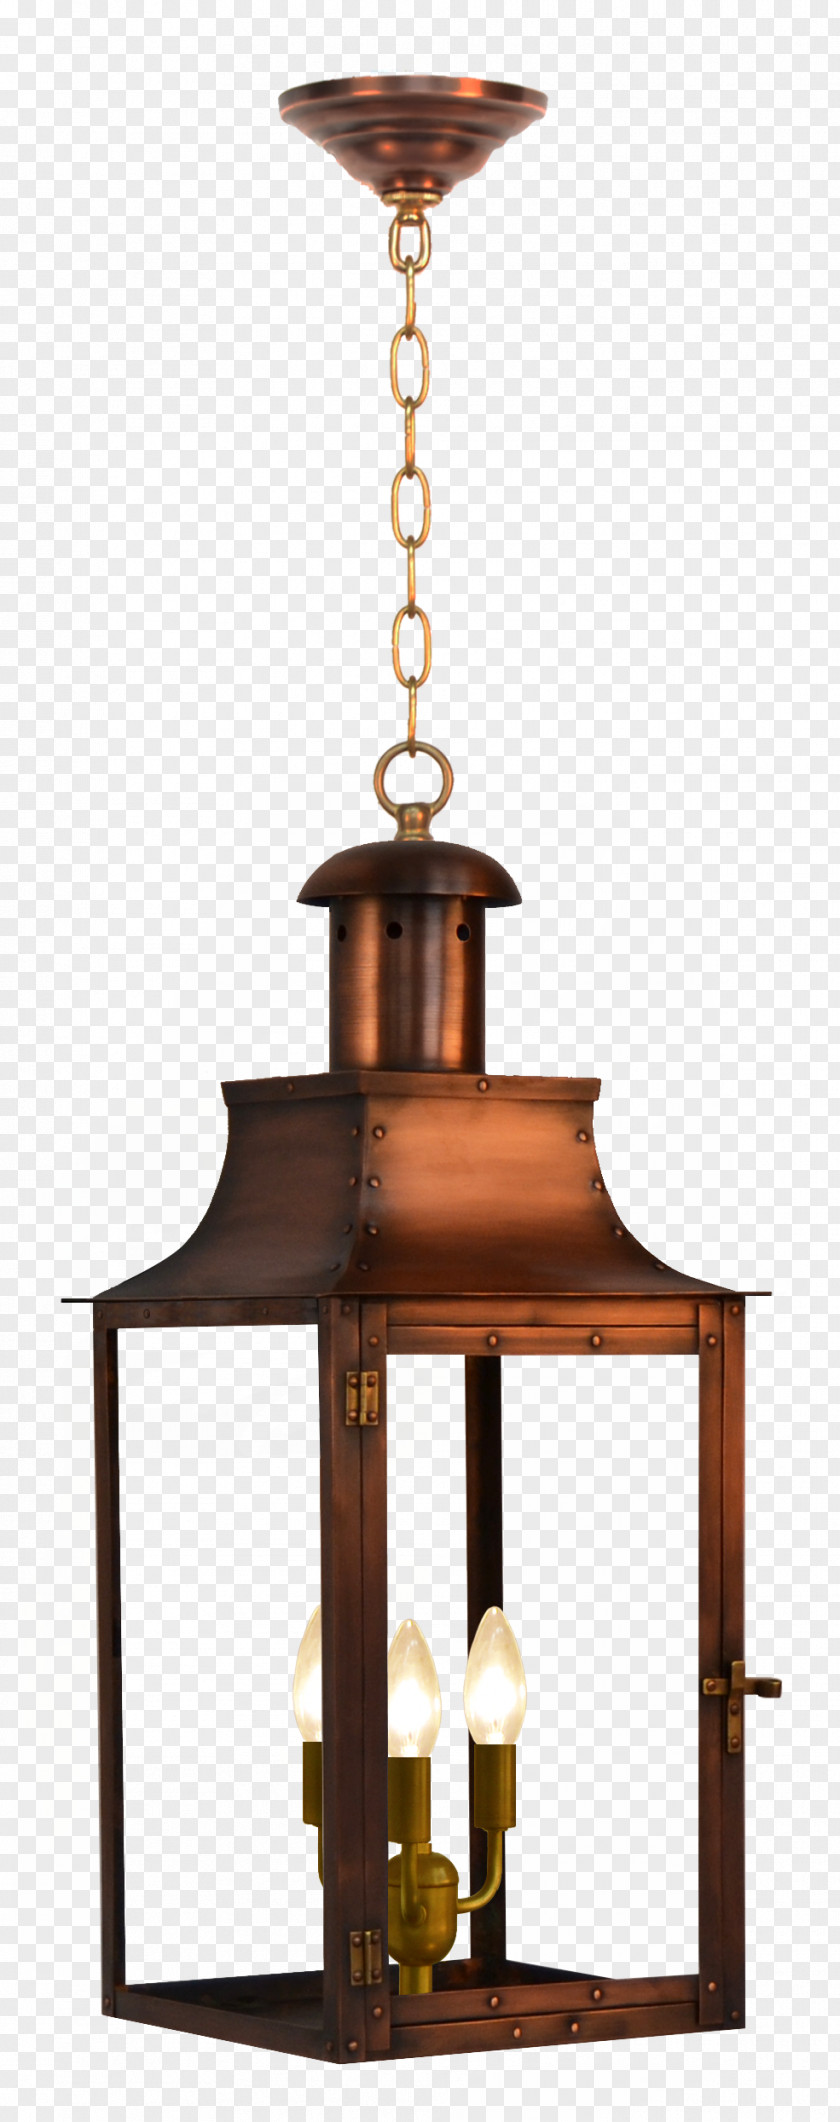 Lantern In Kind Incandescent Light Bulb Lamp Coppersmith PNG